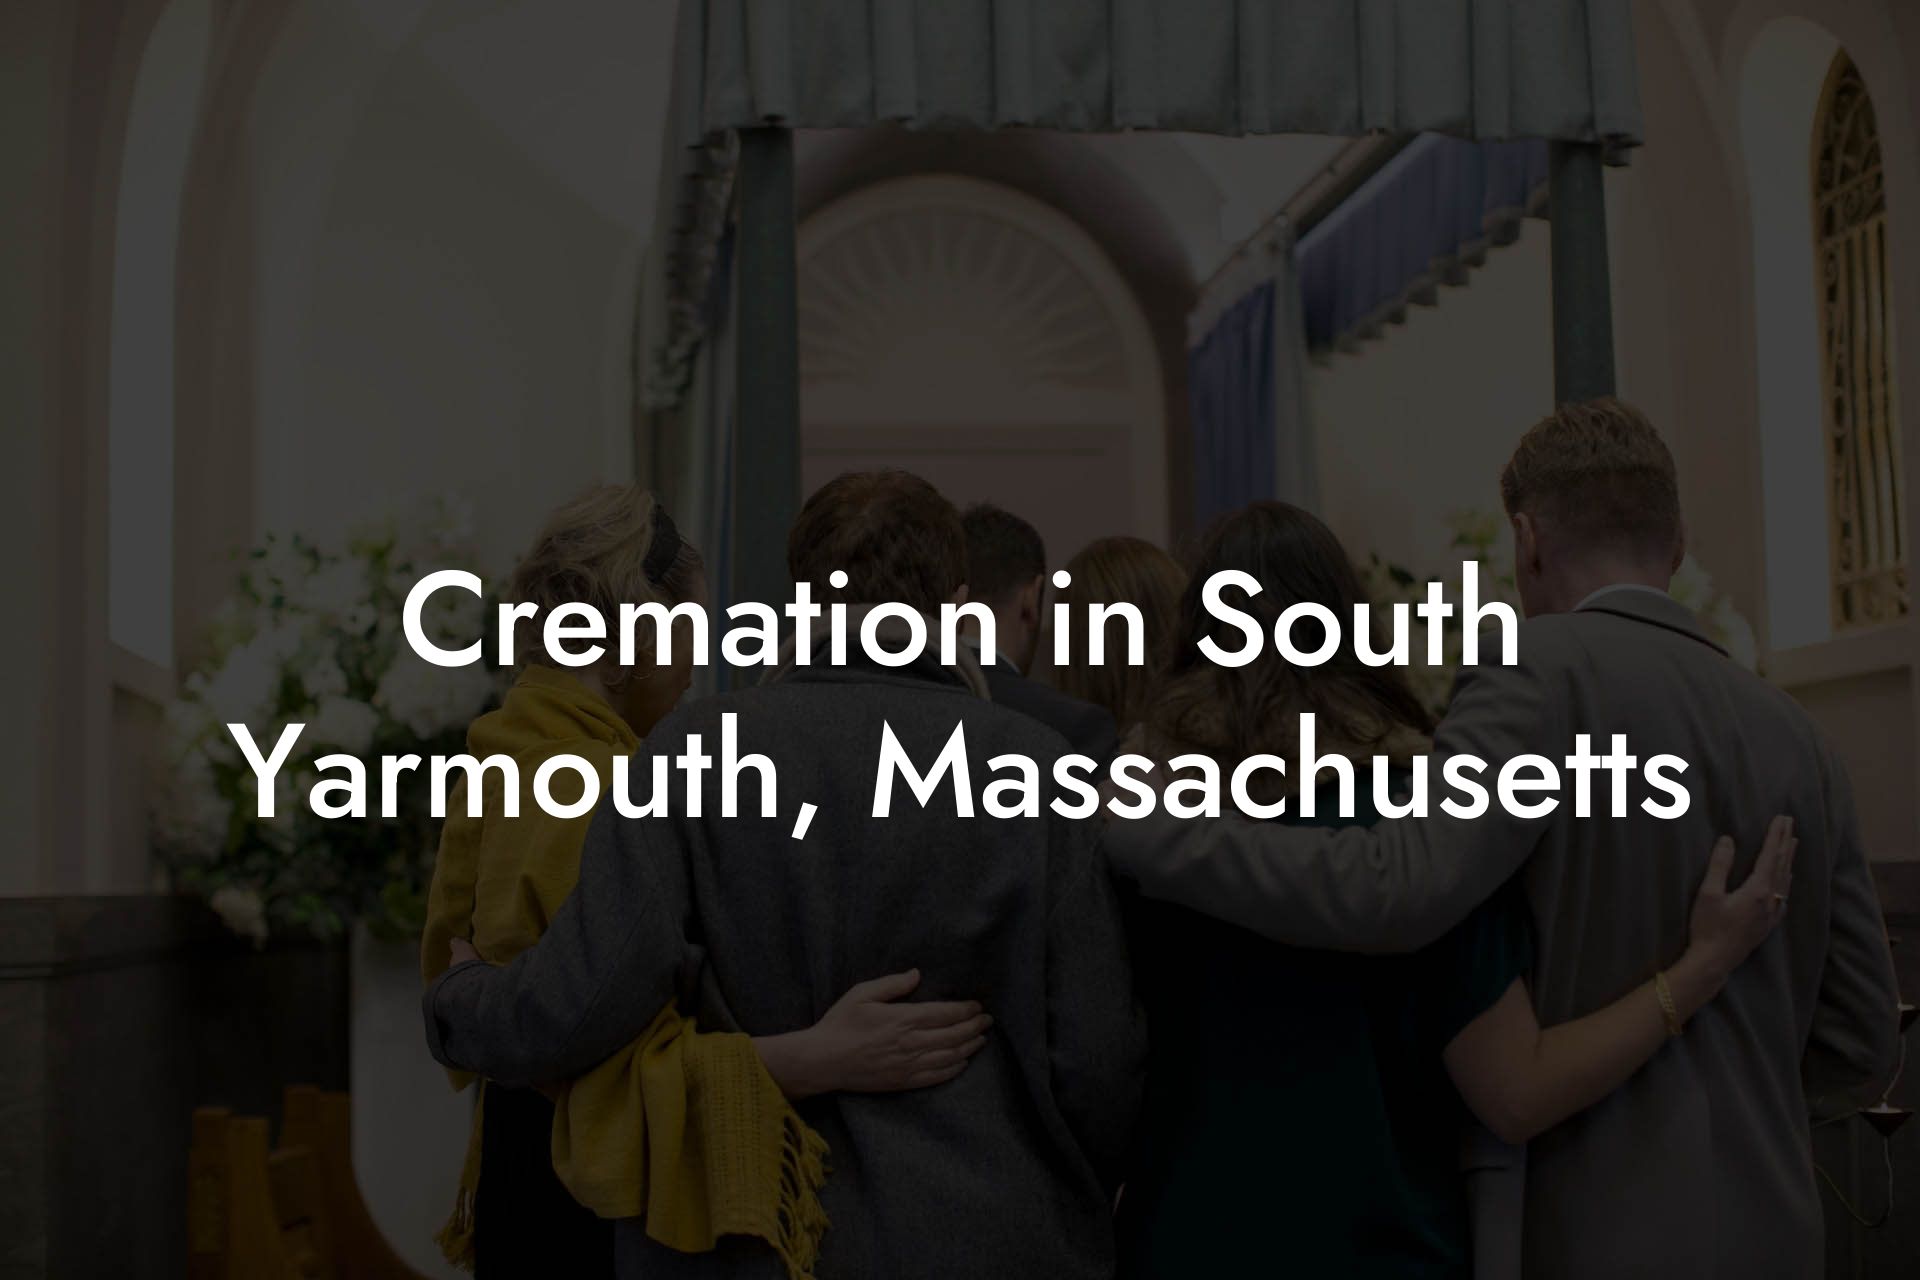 Cremation in South Yarmouth, Massachusetts